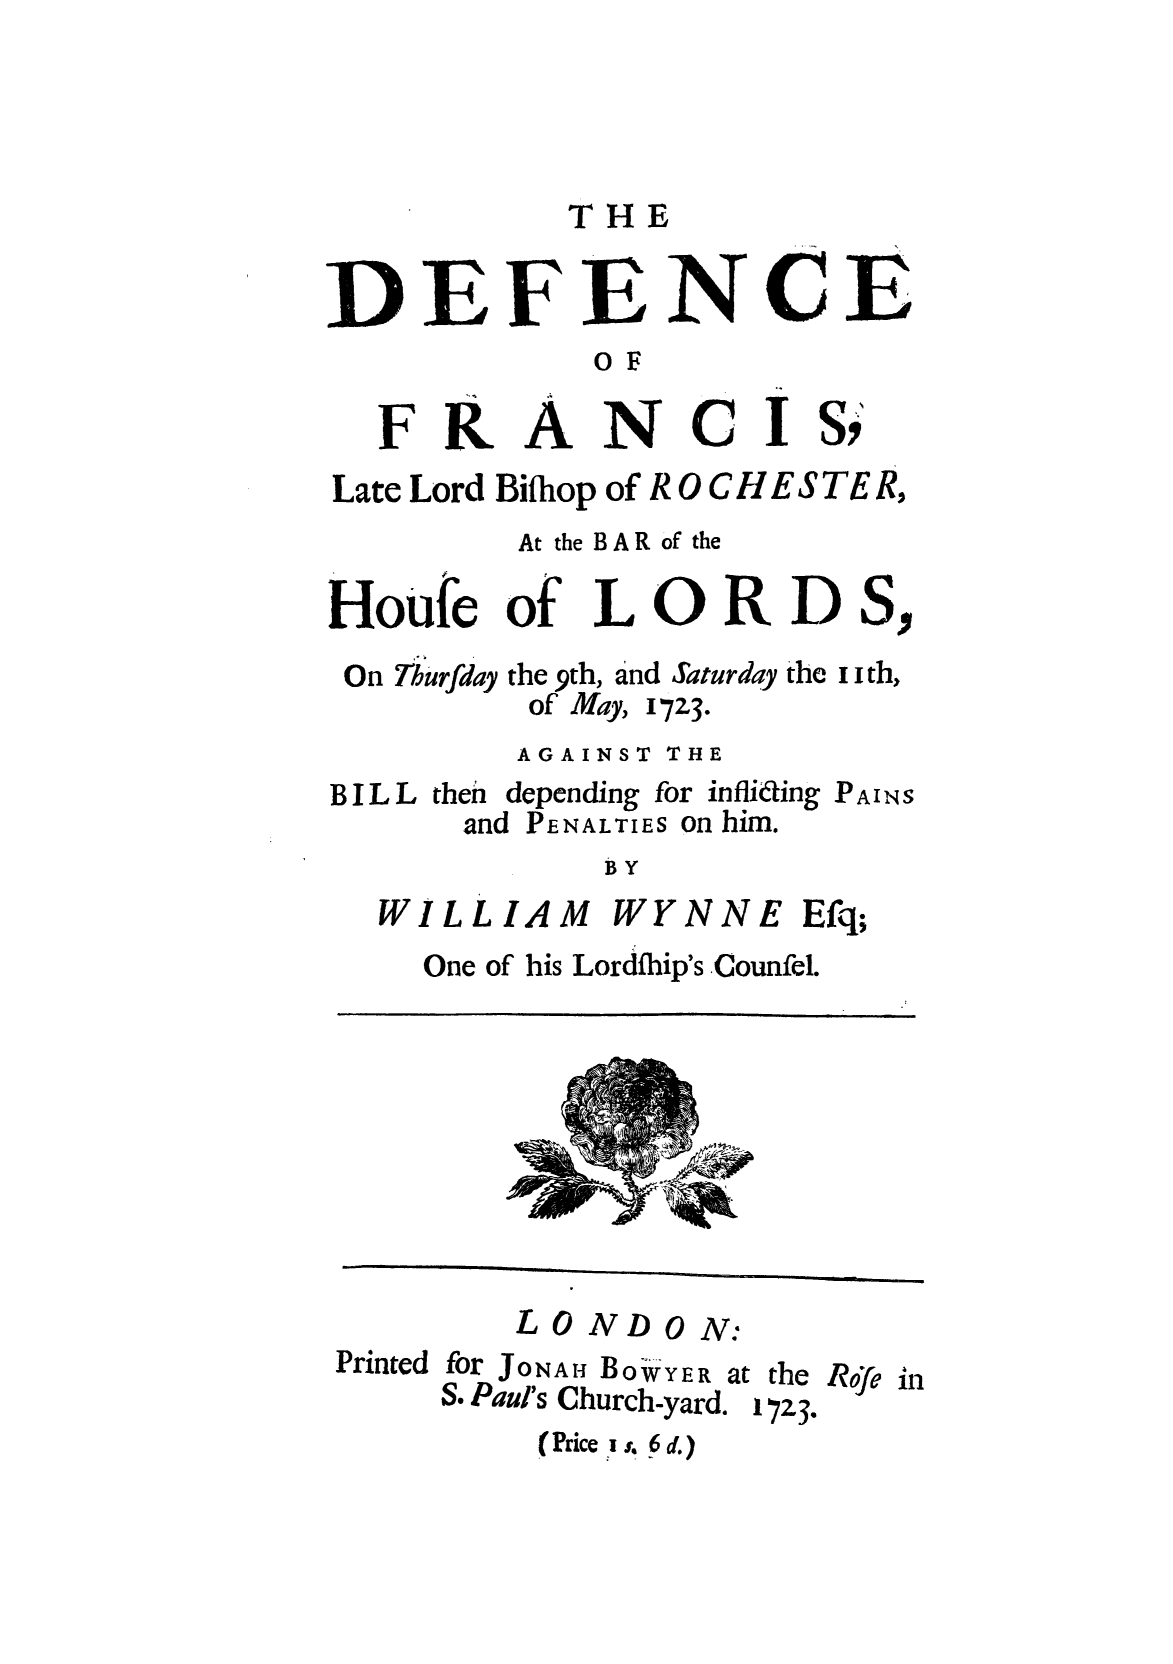 handle is hein.trials/defrcislo0001 and id is 1 raw text is: THE

DEFENCE
OF

FRANCI

S,

Late Lord Bihliop of R 0 C H E S TE R,
At the BAR of the
Houfe of L 0 R D S,

0 n Th u rfday

the 9th, and Saturday the i i th,
of May, 17Z3.

AGAINST THE
B I L L then depending for infliking PAINS
and PENALTIES on him.
BY

WILLIAM

WYNNE

One of his Lordfhip's Counfel.

Printed

L 0 ND0 N:
for JONAHj BOiWYER at the Rfe
S. Paul's Church-yard. 17Z3.
(Price 'is. 6 d.)

Efq;

in


